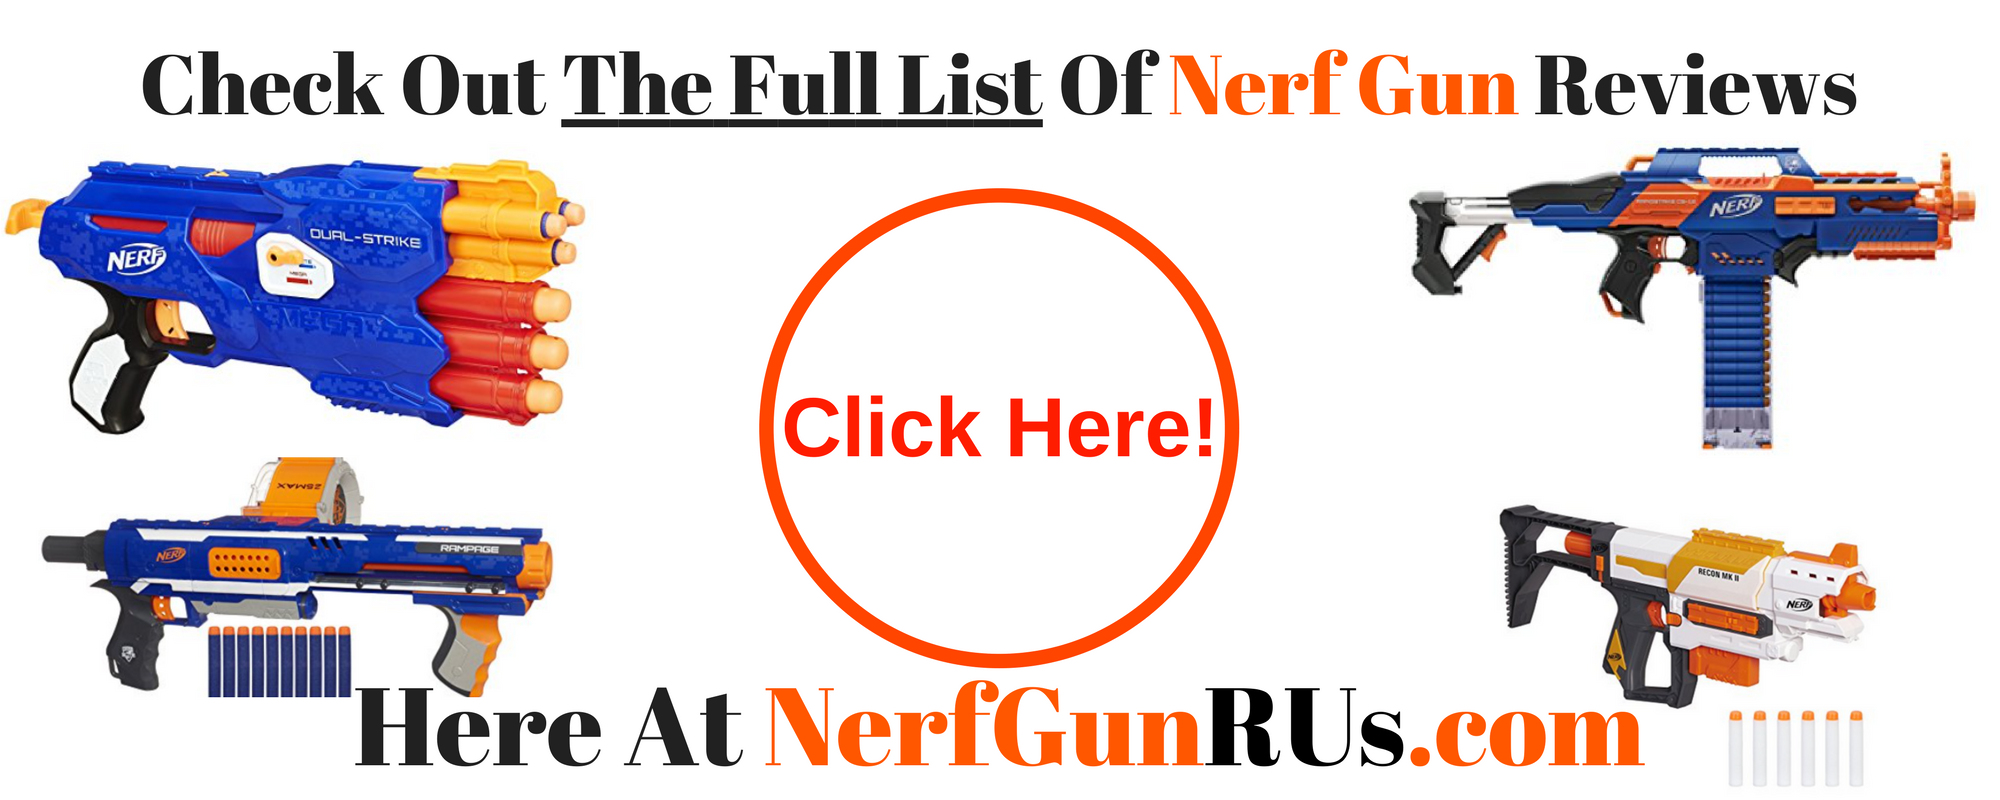 Check Out The Full List Of Nerf Gun Reviews here at NerfGunRUs.com